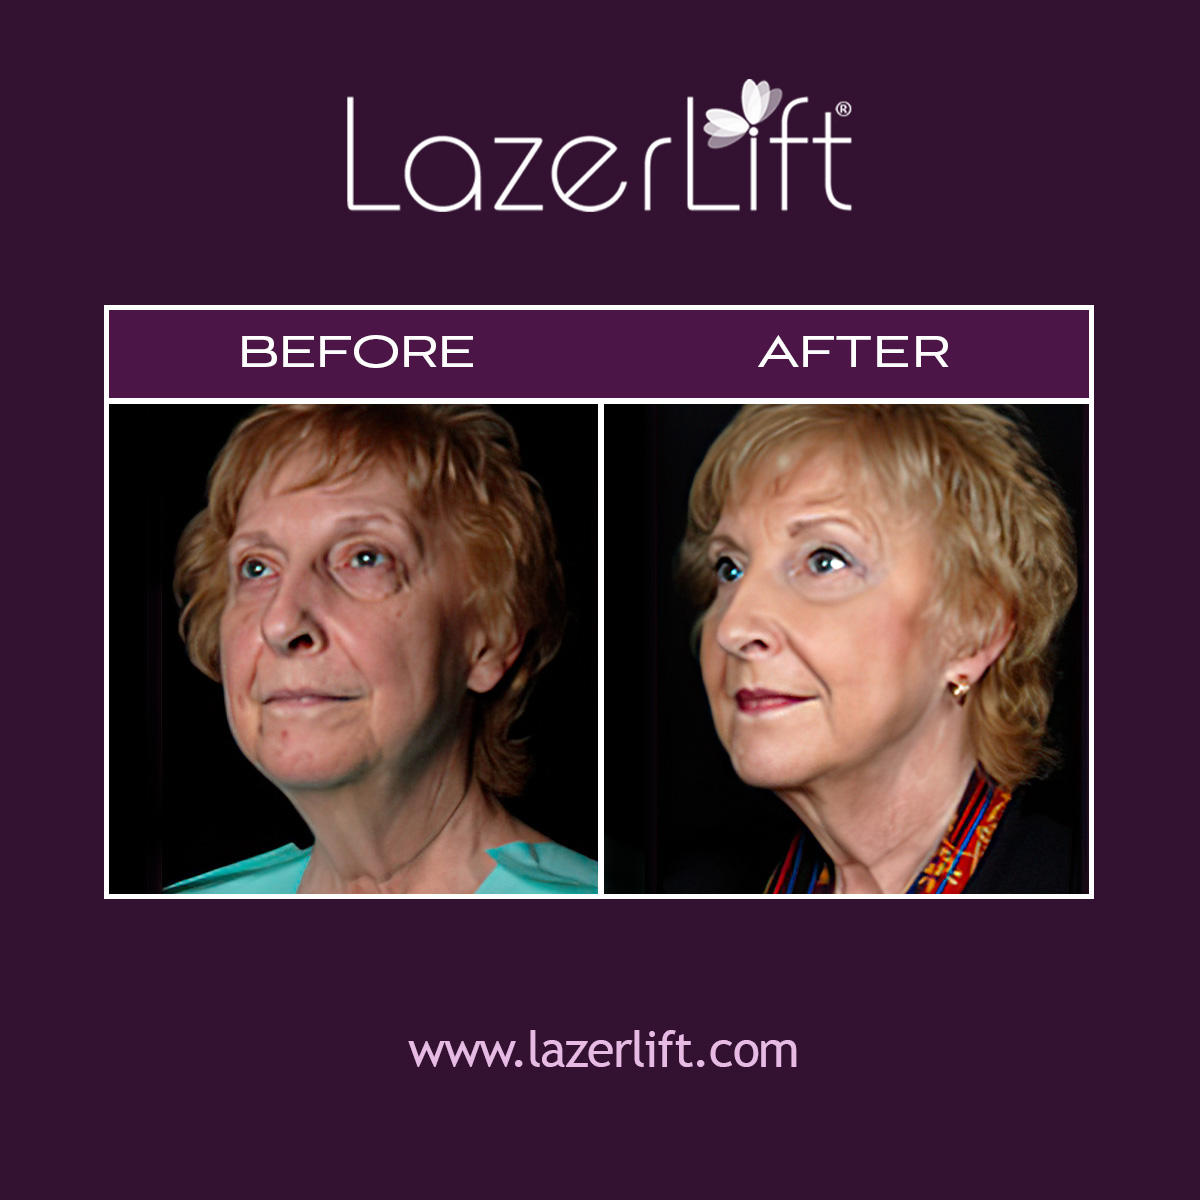 LazerLift® turns back the clock on facial aging. This Tampa facelift uses laser technology to tighten and lift the skin. LazerLift® provides an alternative to facelift surgery. It is minimally invasive and is completed in less than an hour.